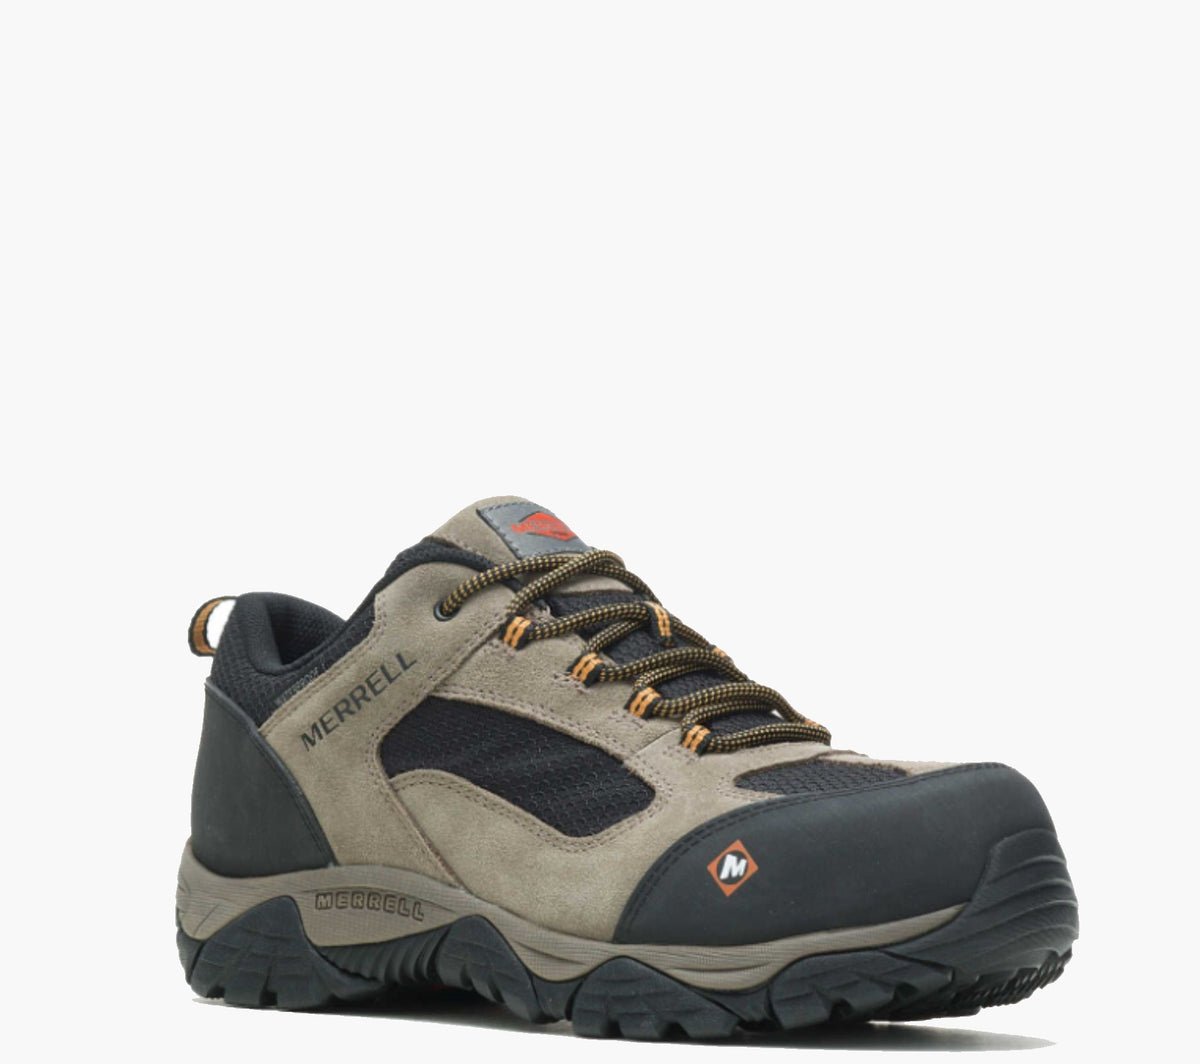 Merrell Work Moab Onset WP EH CT Work Shoe - Work World - Workwear, Work Boots, Safety Gear